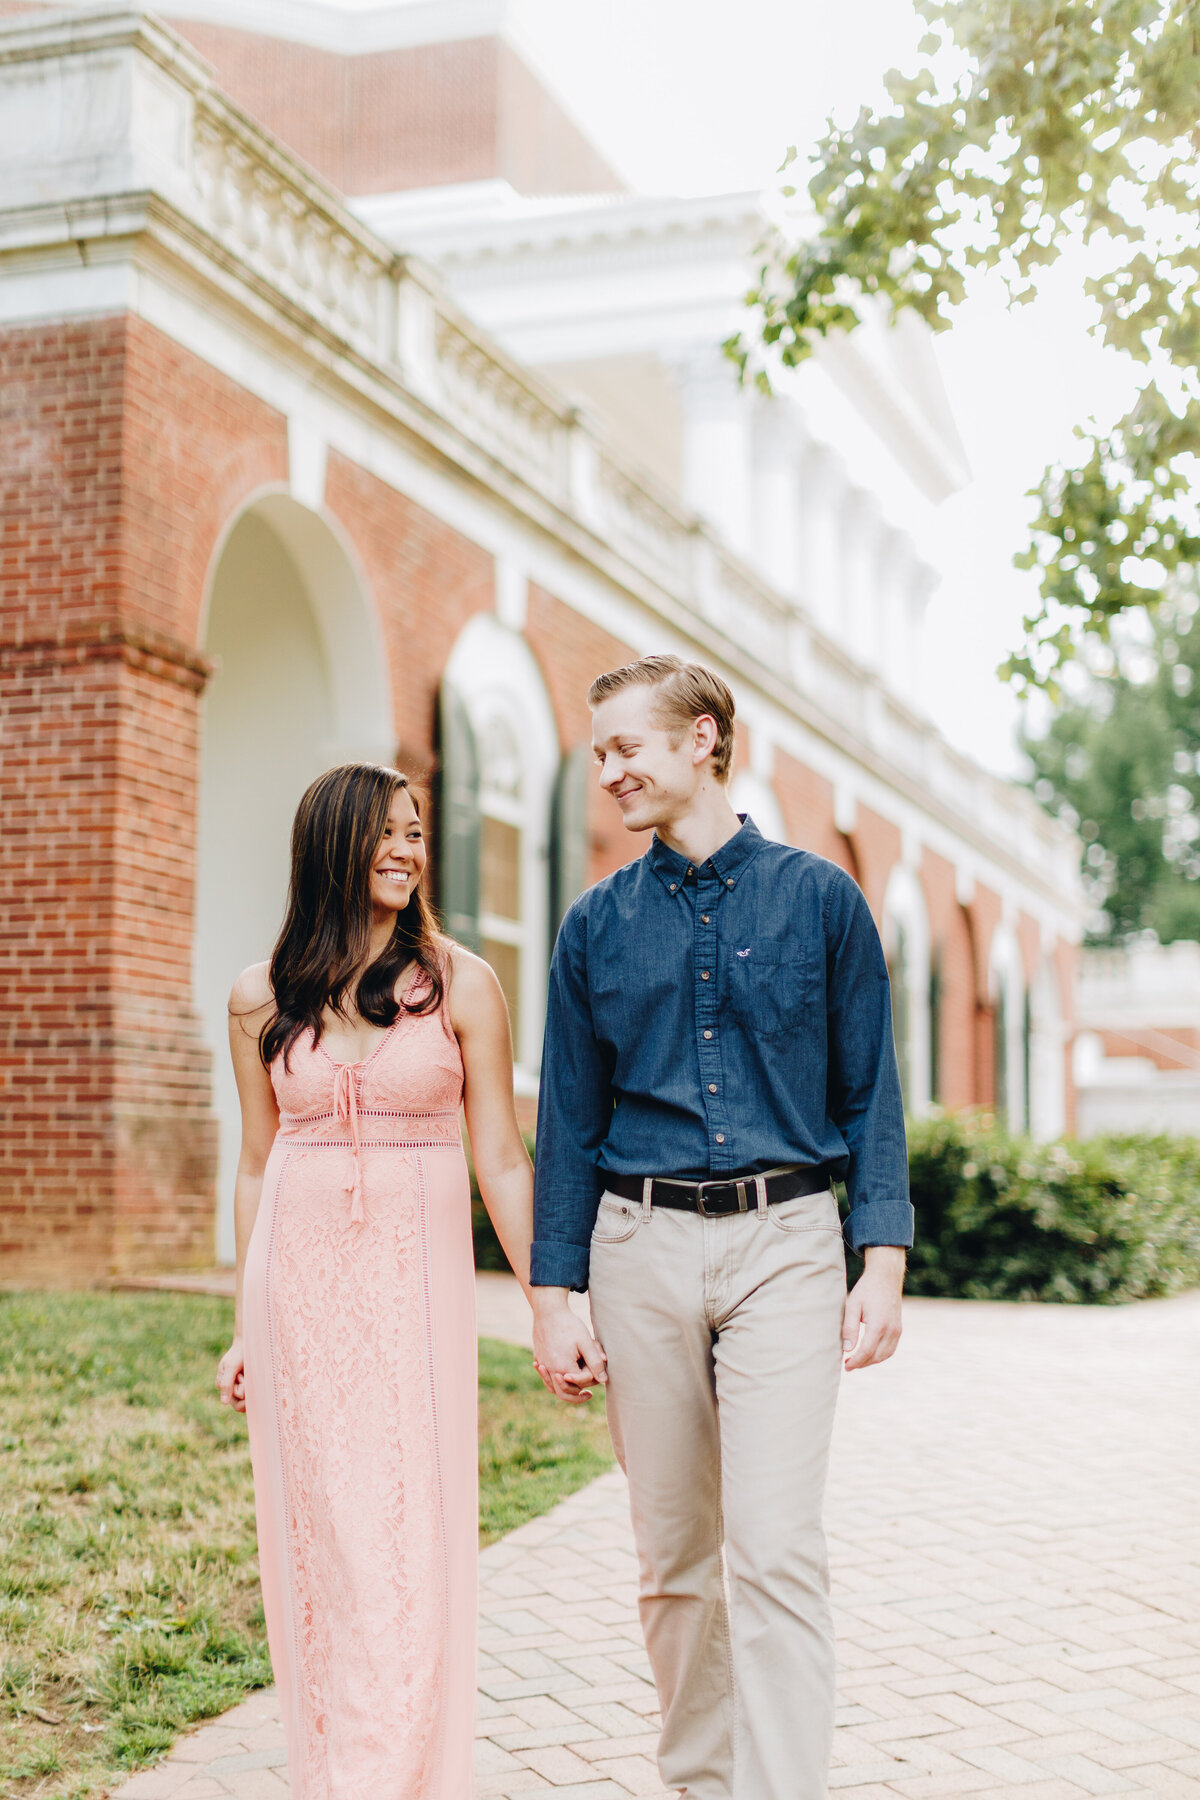 Erin-and-Mitch_Engagement-session_Danielle-Pearce-Photo_2